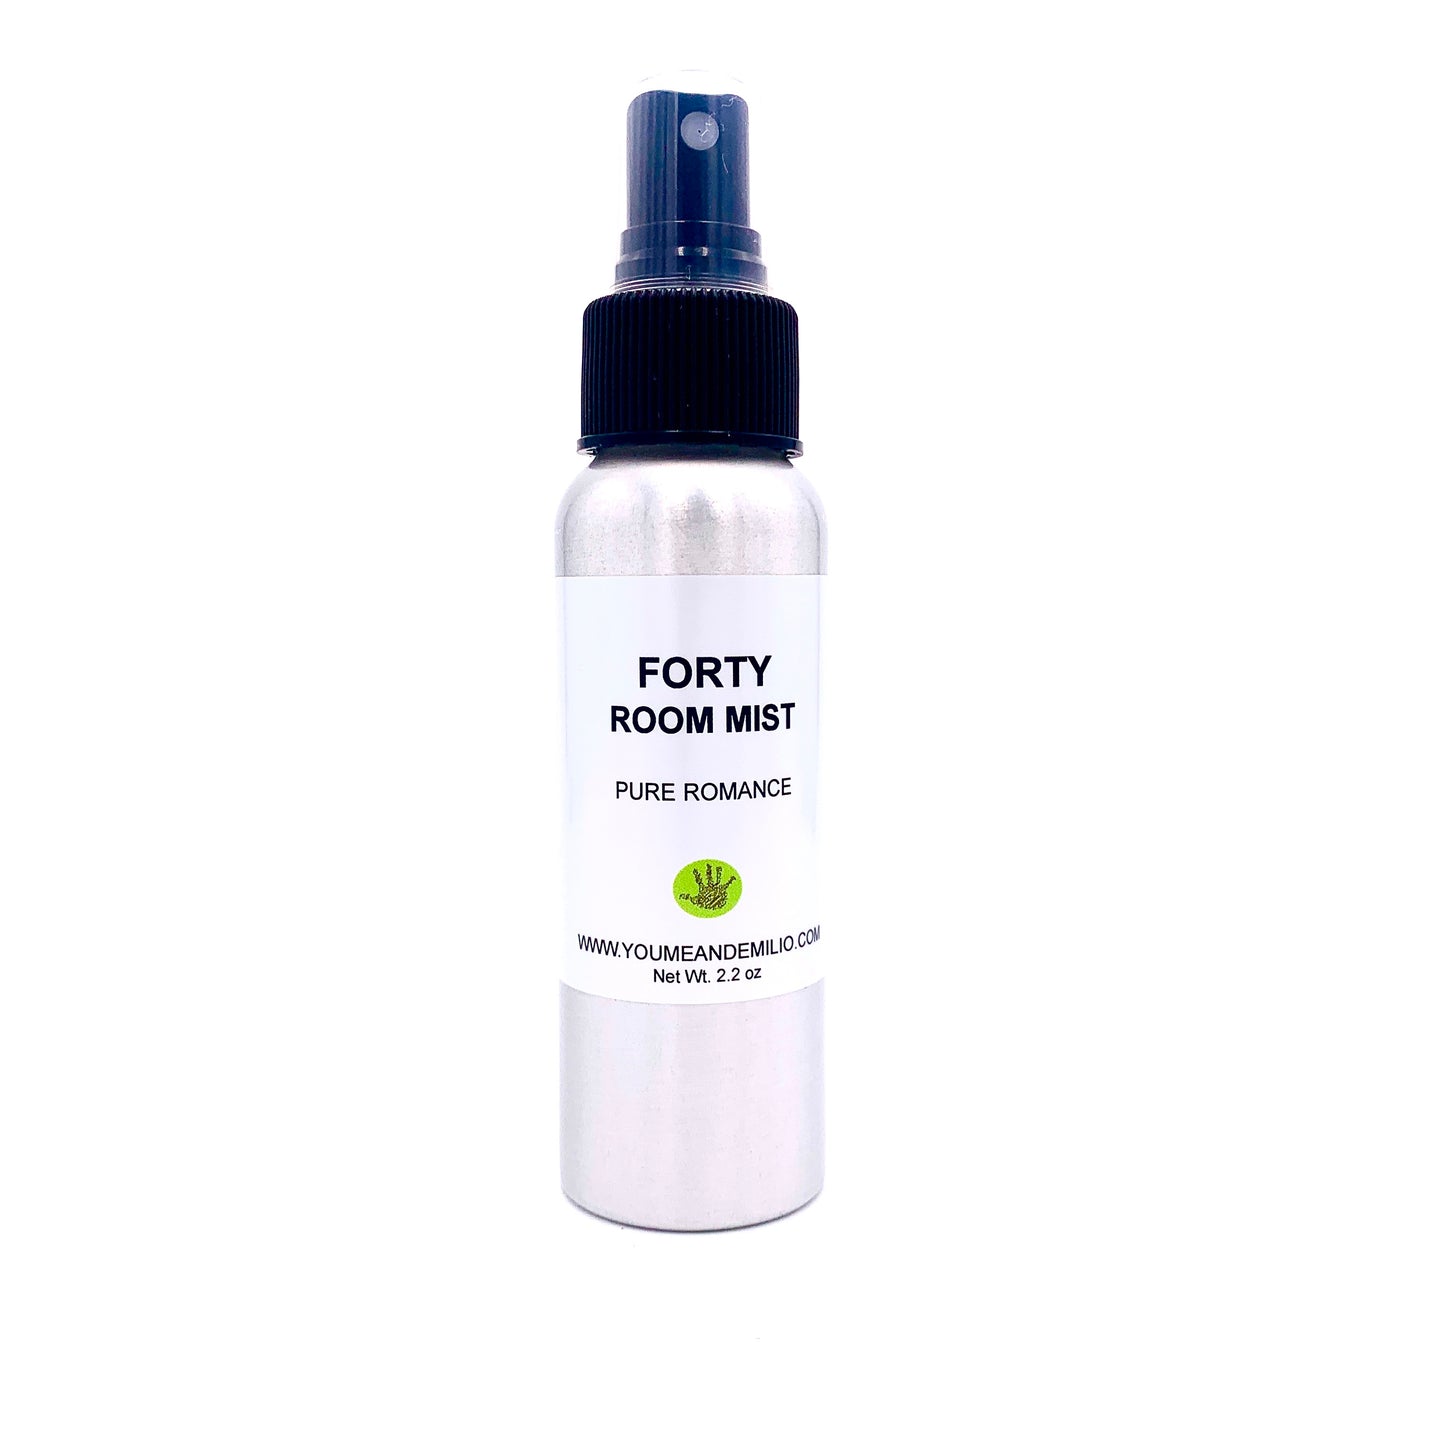 Forty Room Mist